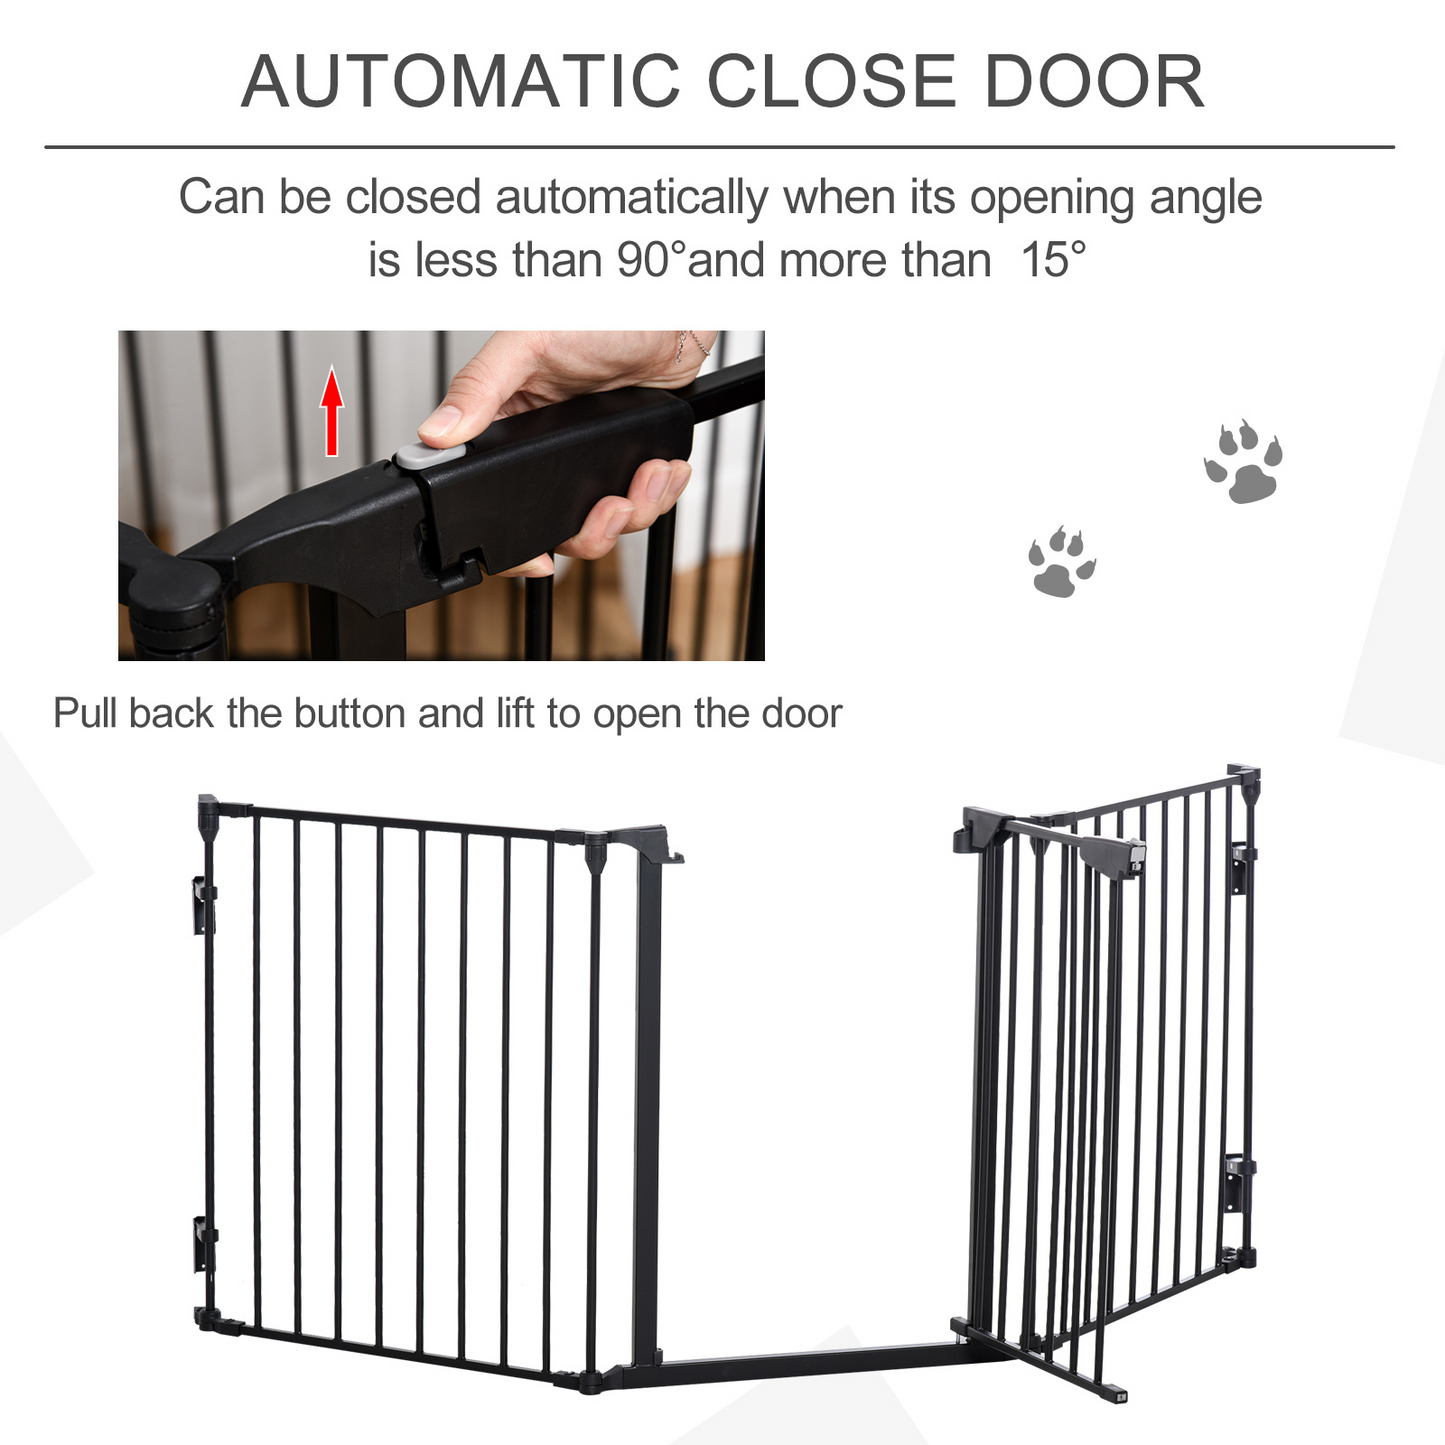 PawHut Pet Safety Gate 3-Panel Playpen Fireplace Christmas Tree Metal Fence Stair Barrier Room Divider with Walk Through Door Automatically Close Lock Black